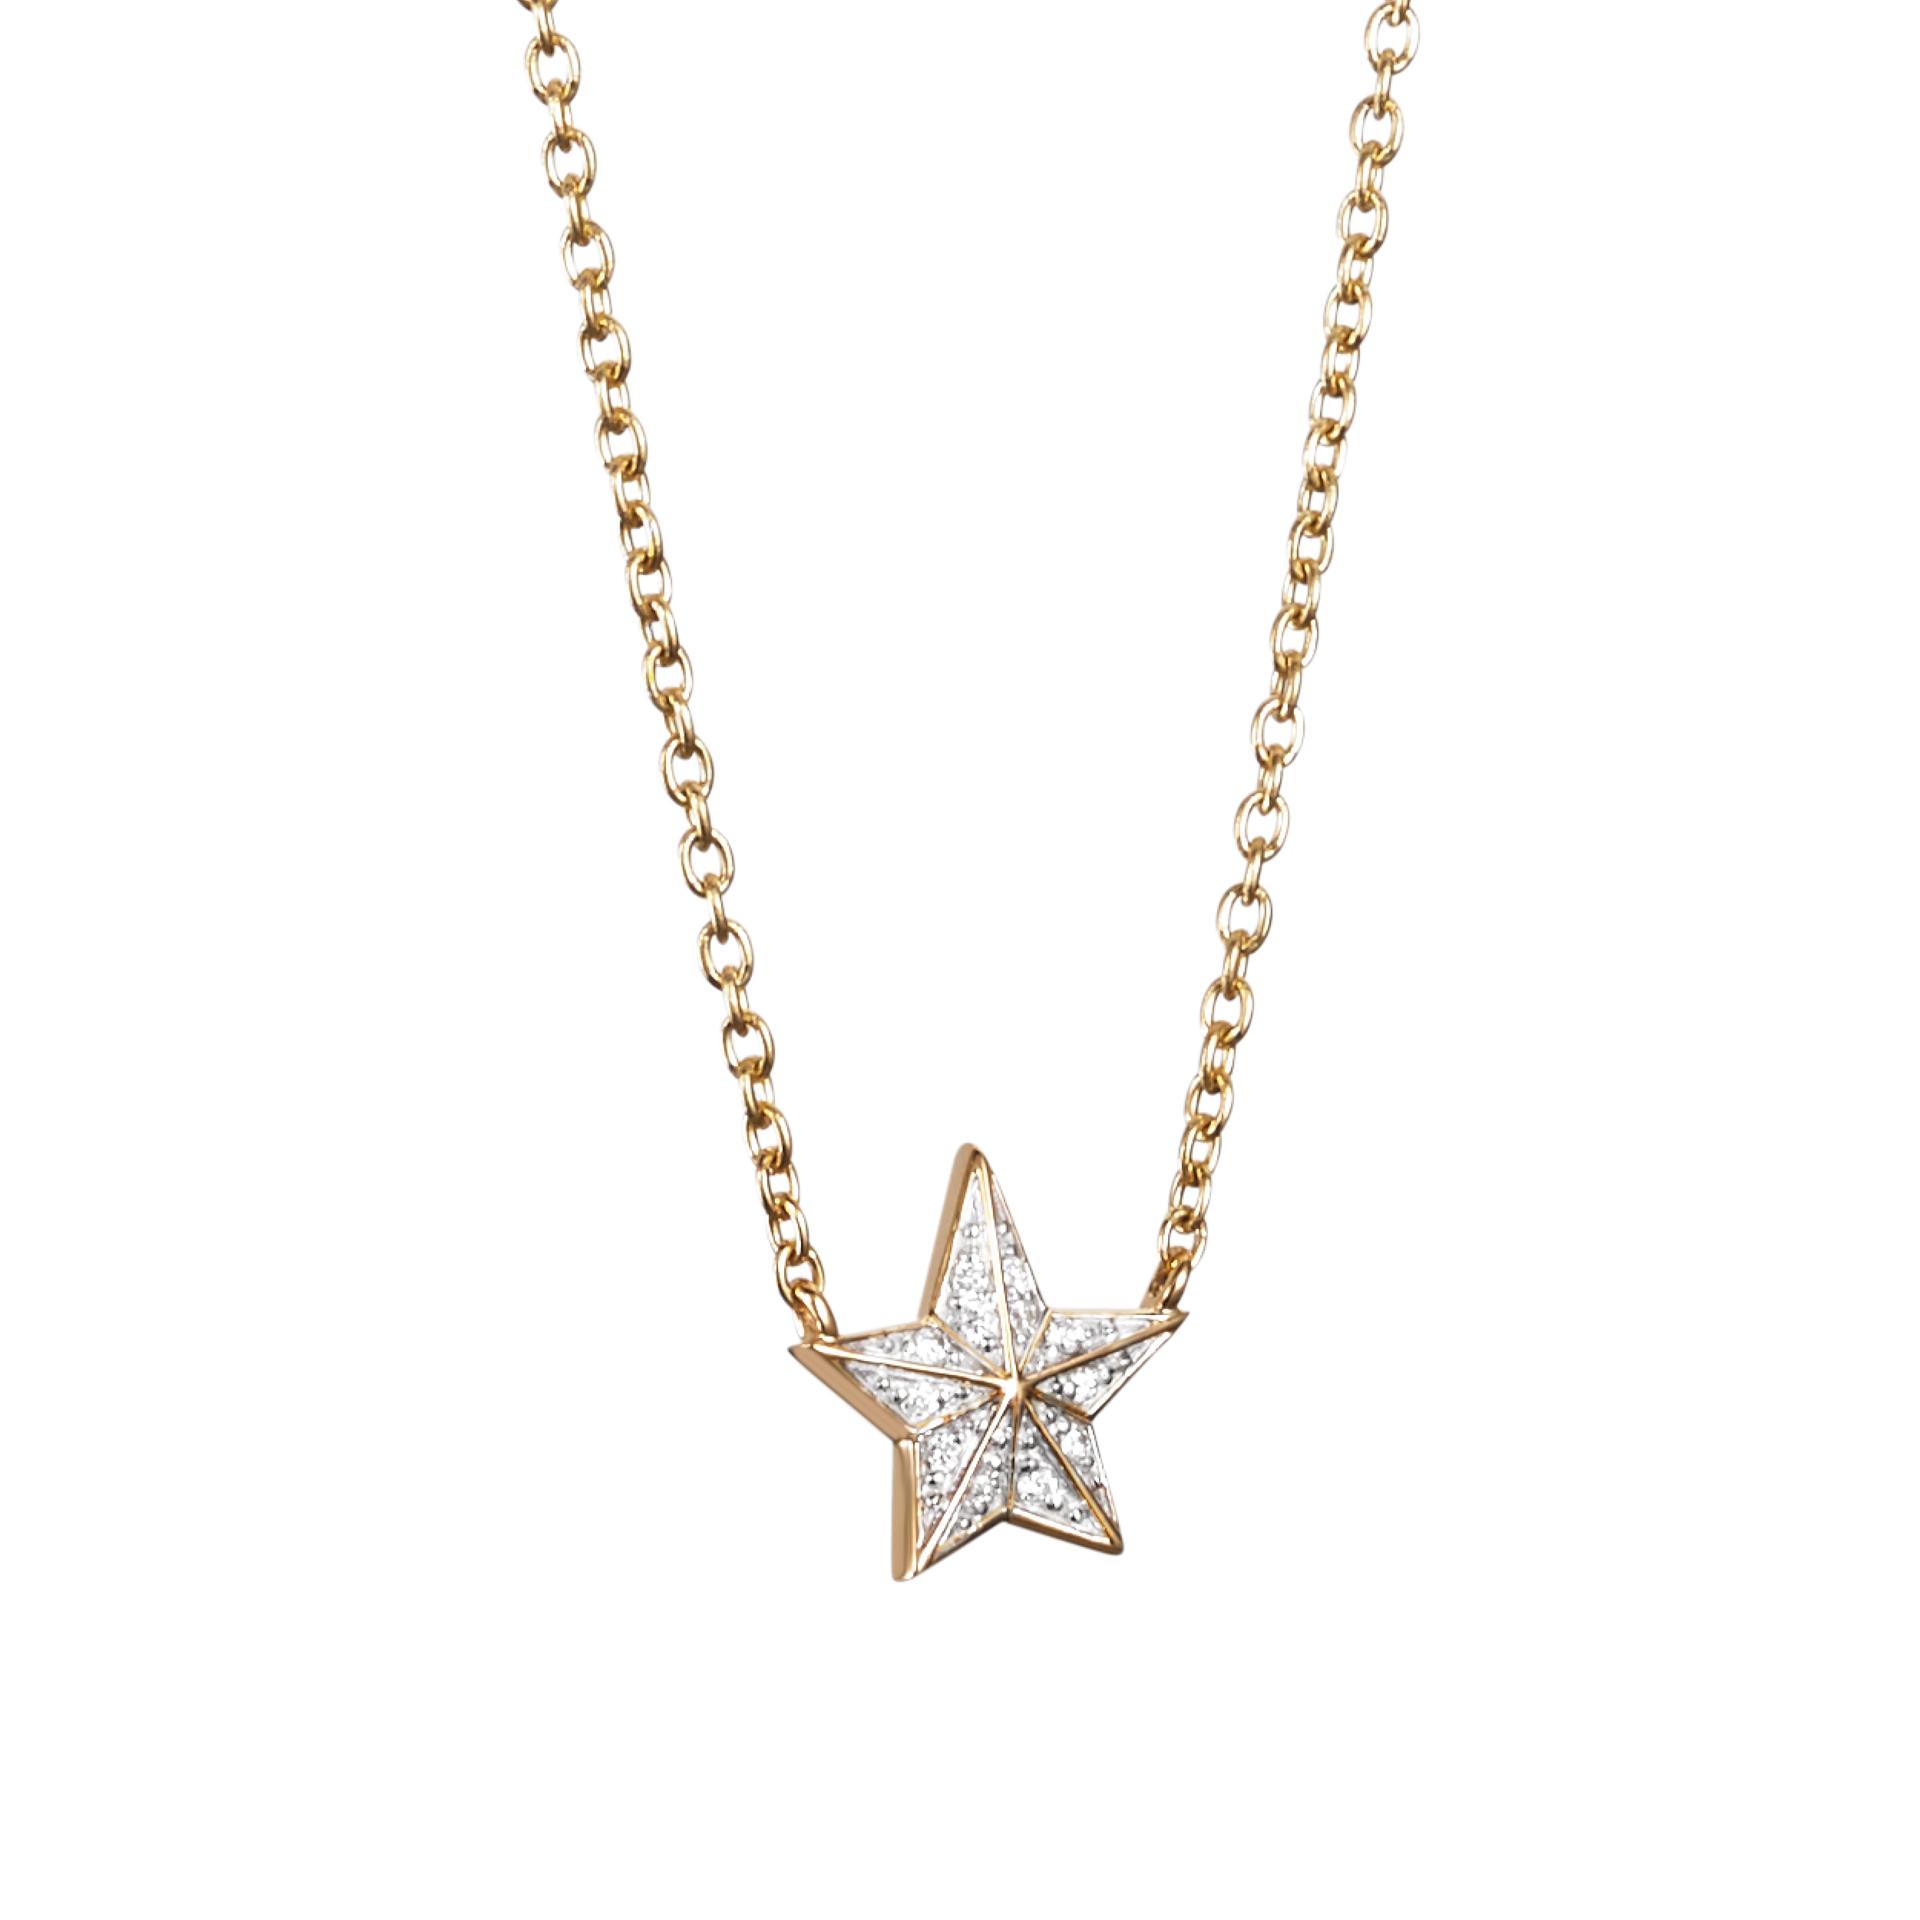 CATCH A FALLING STAR & STARS NECKLACE.